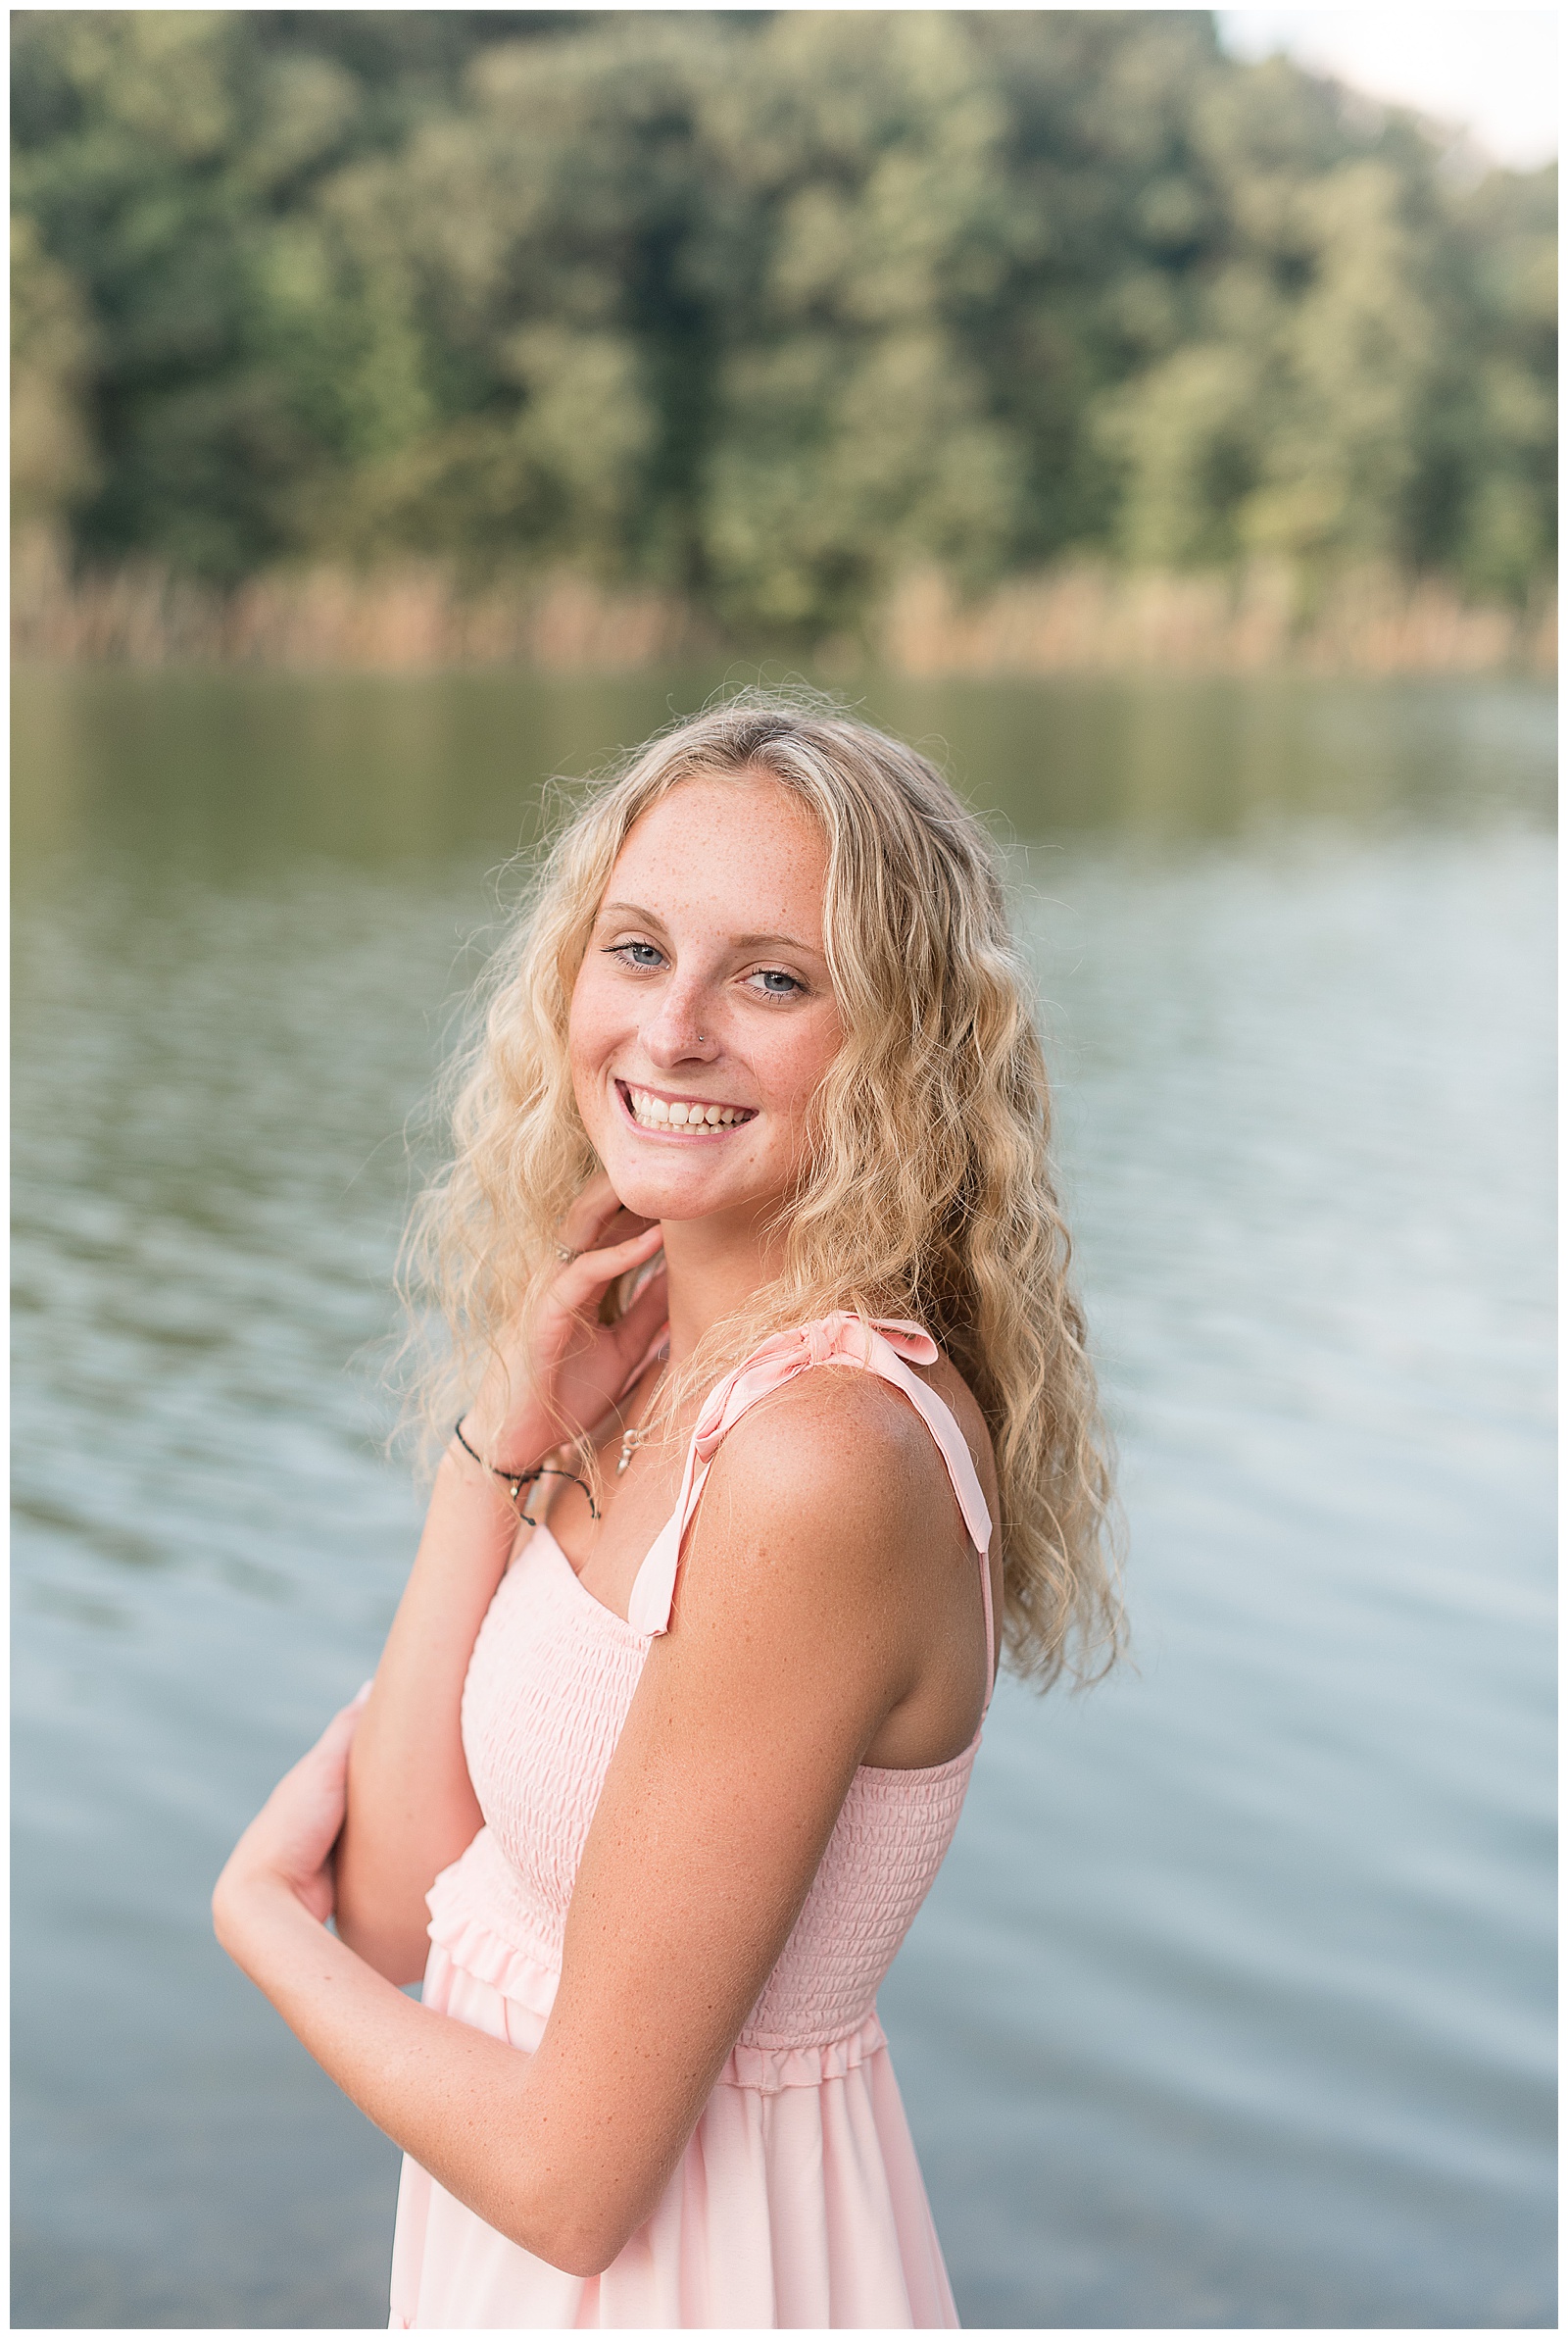 senior girl with left shoulder towards camera and her right hand on her right shoulder smiling wearing light pink dress by lake in lititz pennsylvania